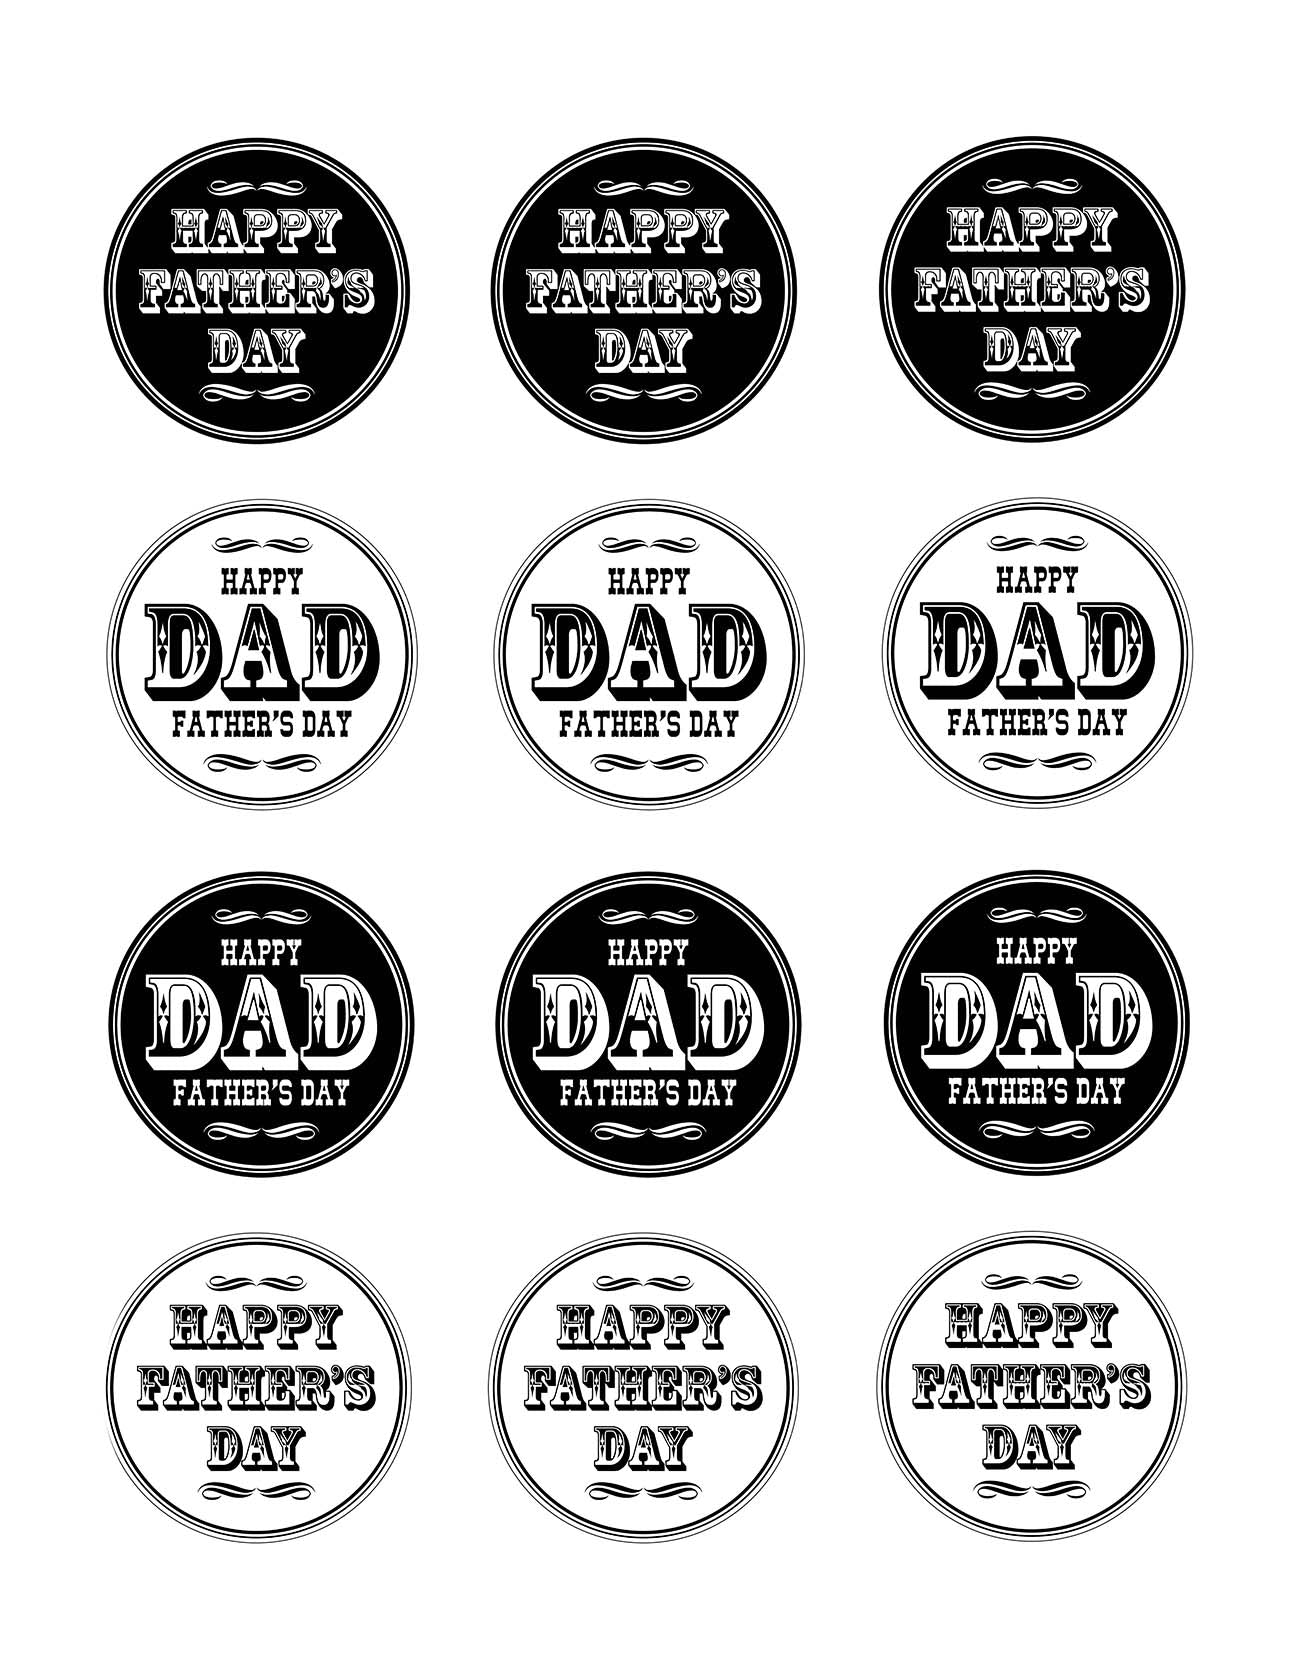 Happy Father's Day – 5cm (2inch) Cupcake Edible Image Sheet – 12 Per Sheet Edible Cake Topper, Edible Cake Image, ,printsoncakes